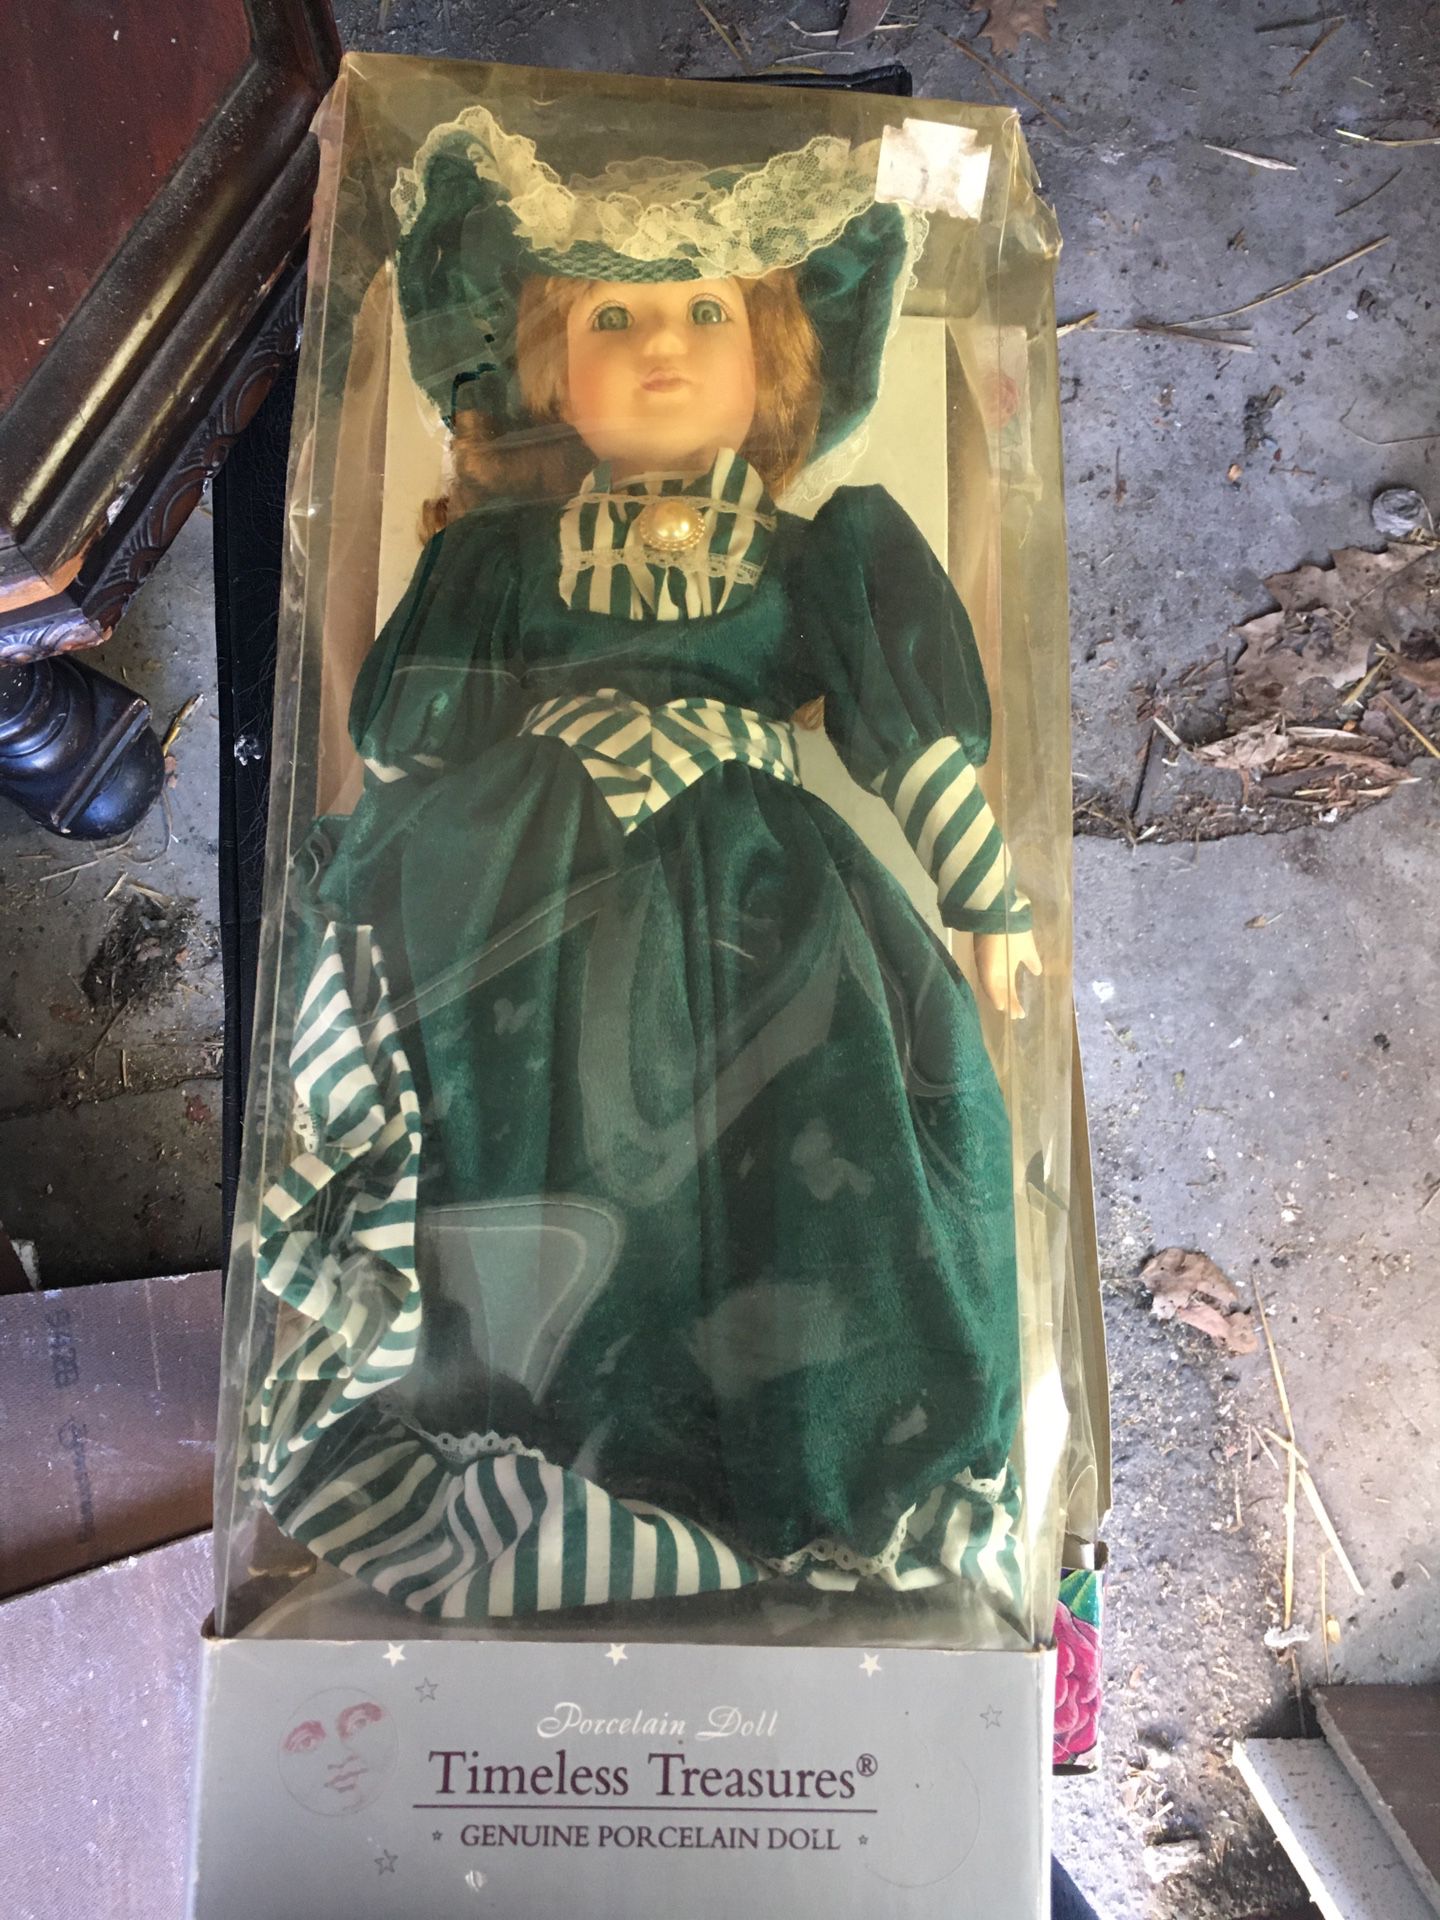 Collectible barbies and glass dolls